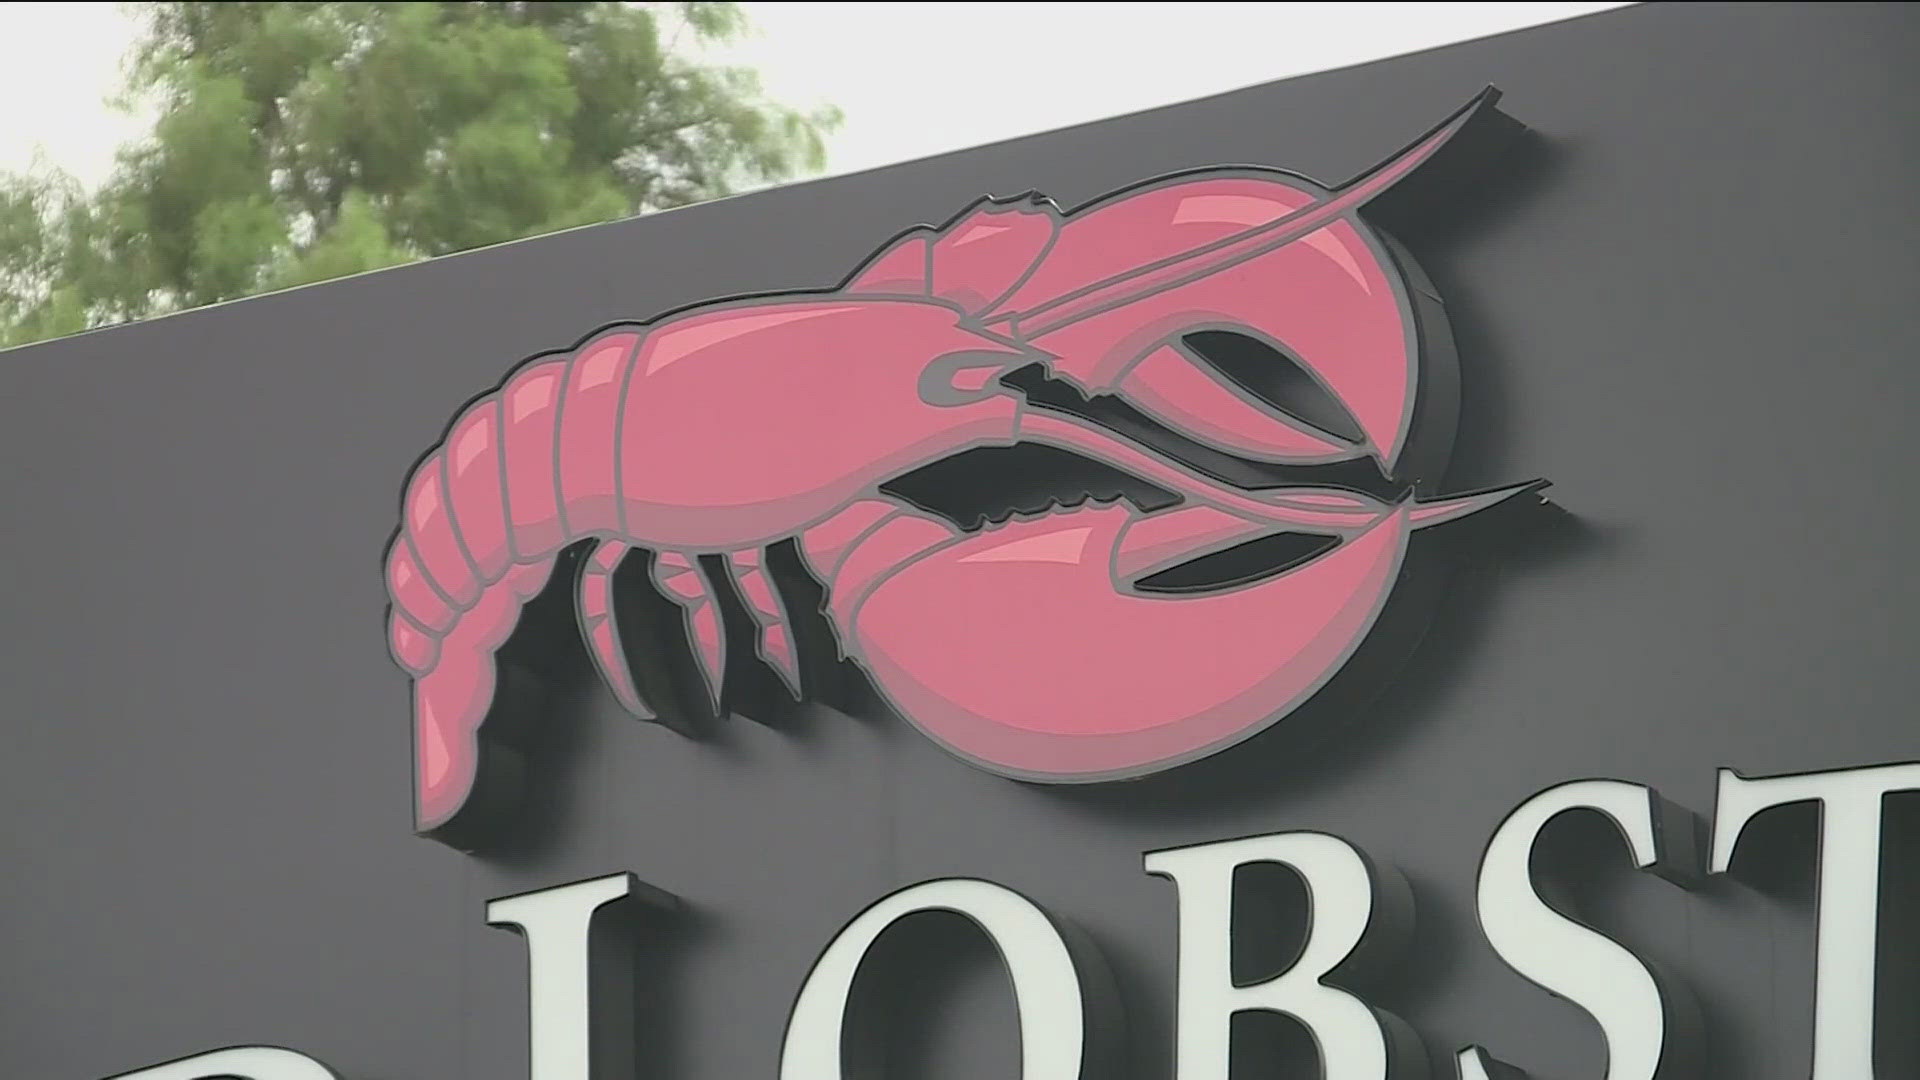 Promotions like the all-you-can-eat shrimp, meant to draw people to the restaurants, ended up hurting Red Lobster's bottom line.